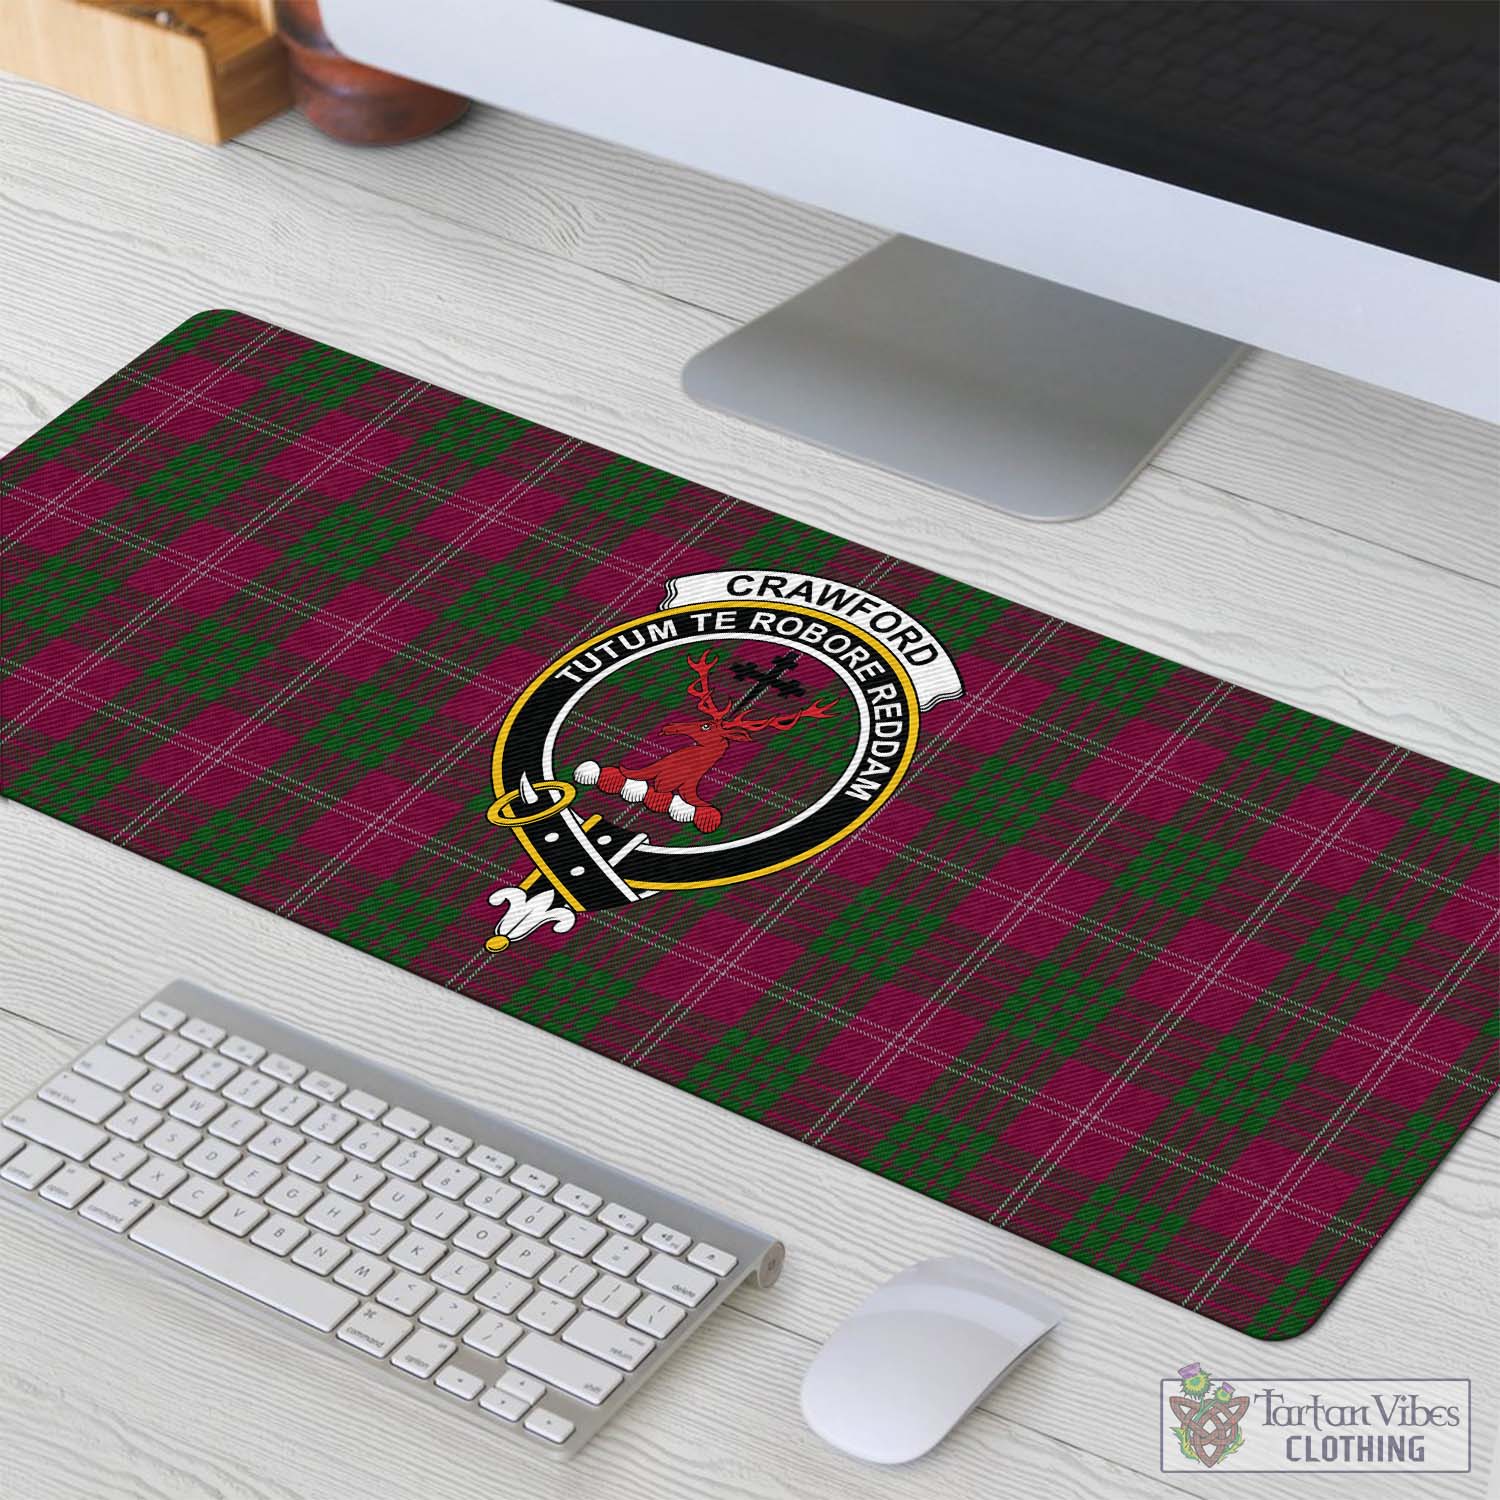 Tartan Vibes Clothing Crawford Tartan Mouse Pad with Family Crest